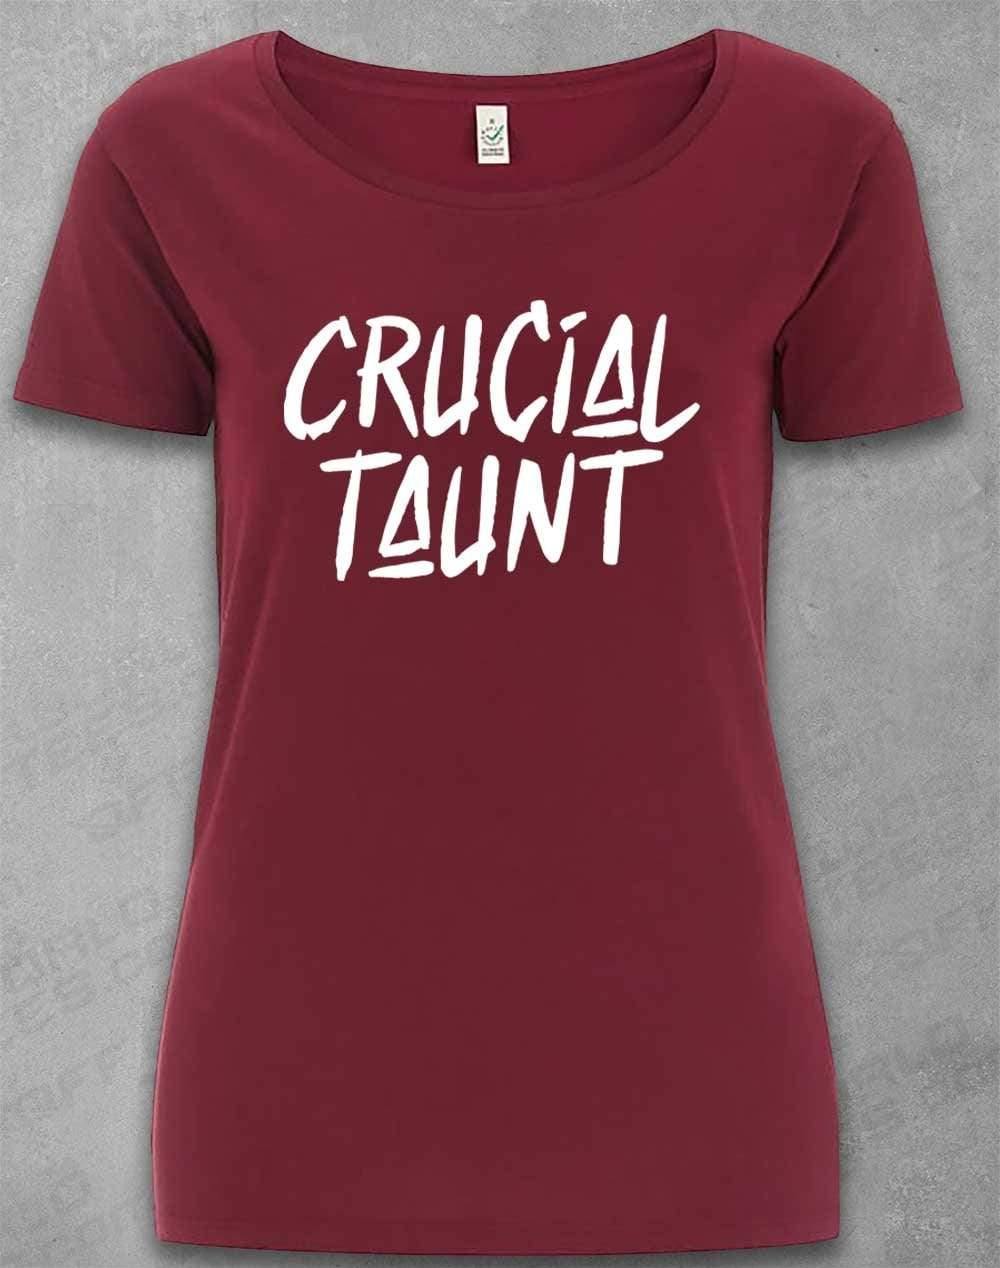 DELUXE Crucial Taunt Organic Scoop Neck T-Shirt 8-10 / Burgundy  - Off World Tees